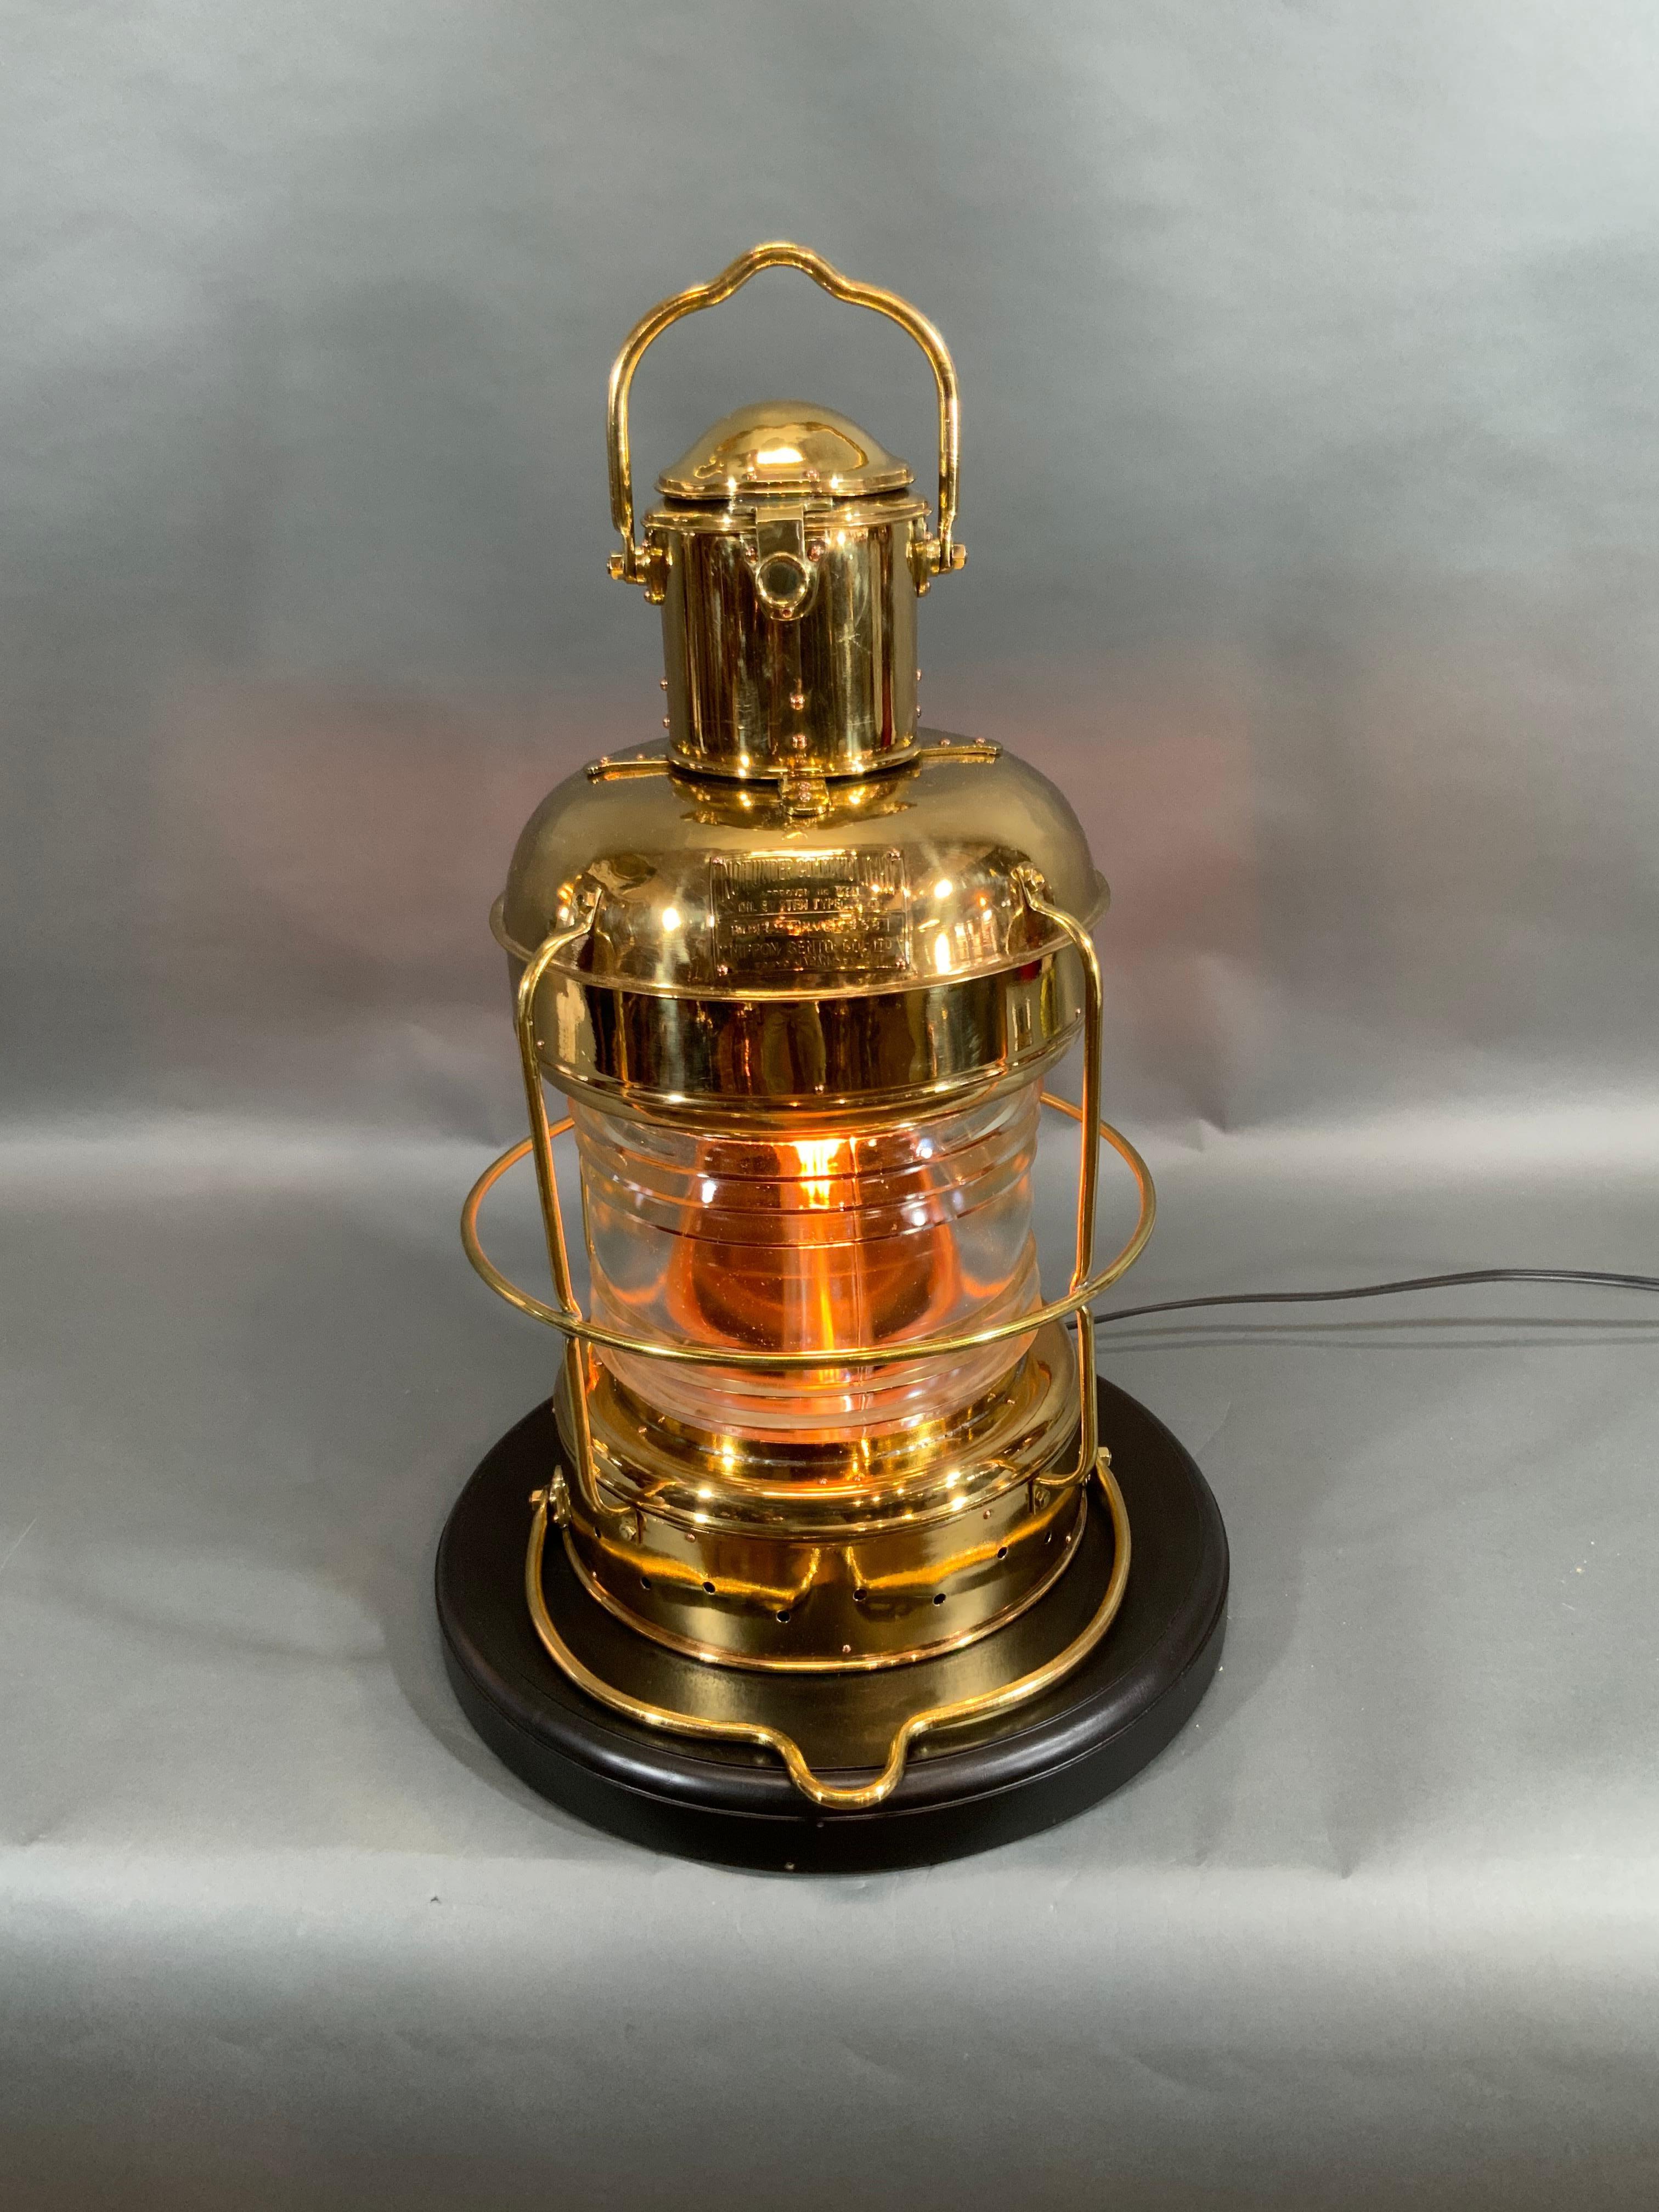 Solid brass ship's anchor lantern with glass Fresnel lens. Wired with electricity. Japanese maker's badge from by Nippon Sento Co. LTD, Tokyo, Japan, dated 1958. Meticulously polished and lacquered. Mounted to a wood base.

Overall dimensions: